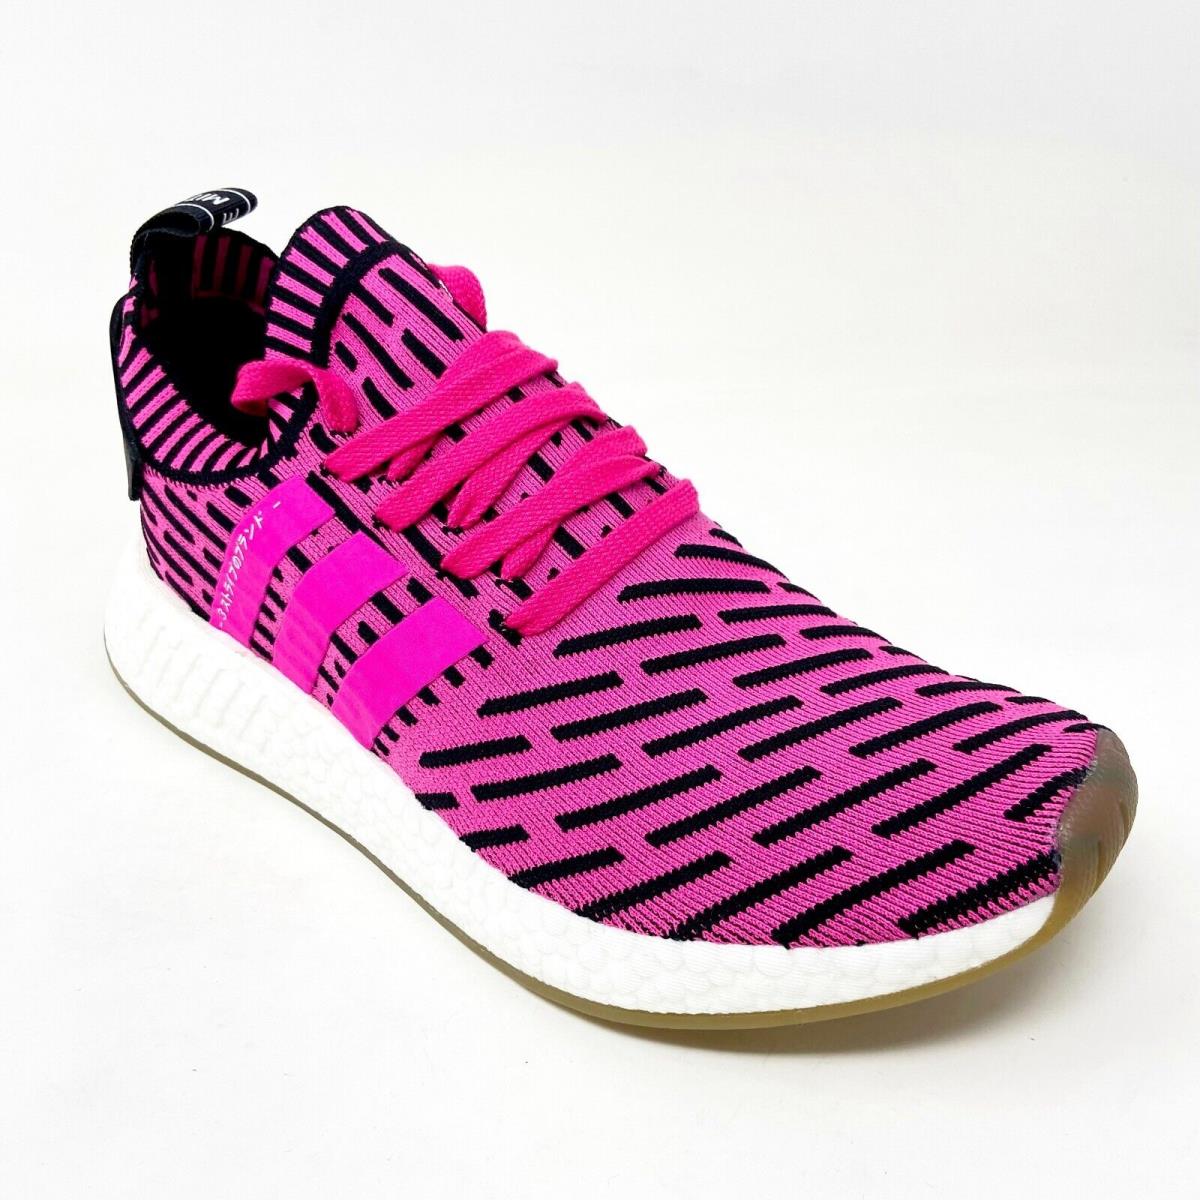 Adidas shoes NMD - Pink 0